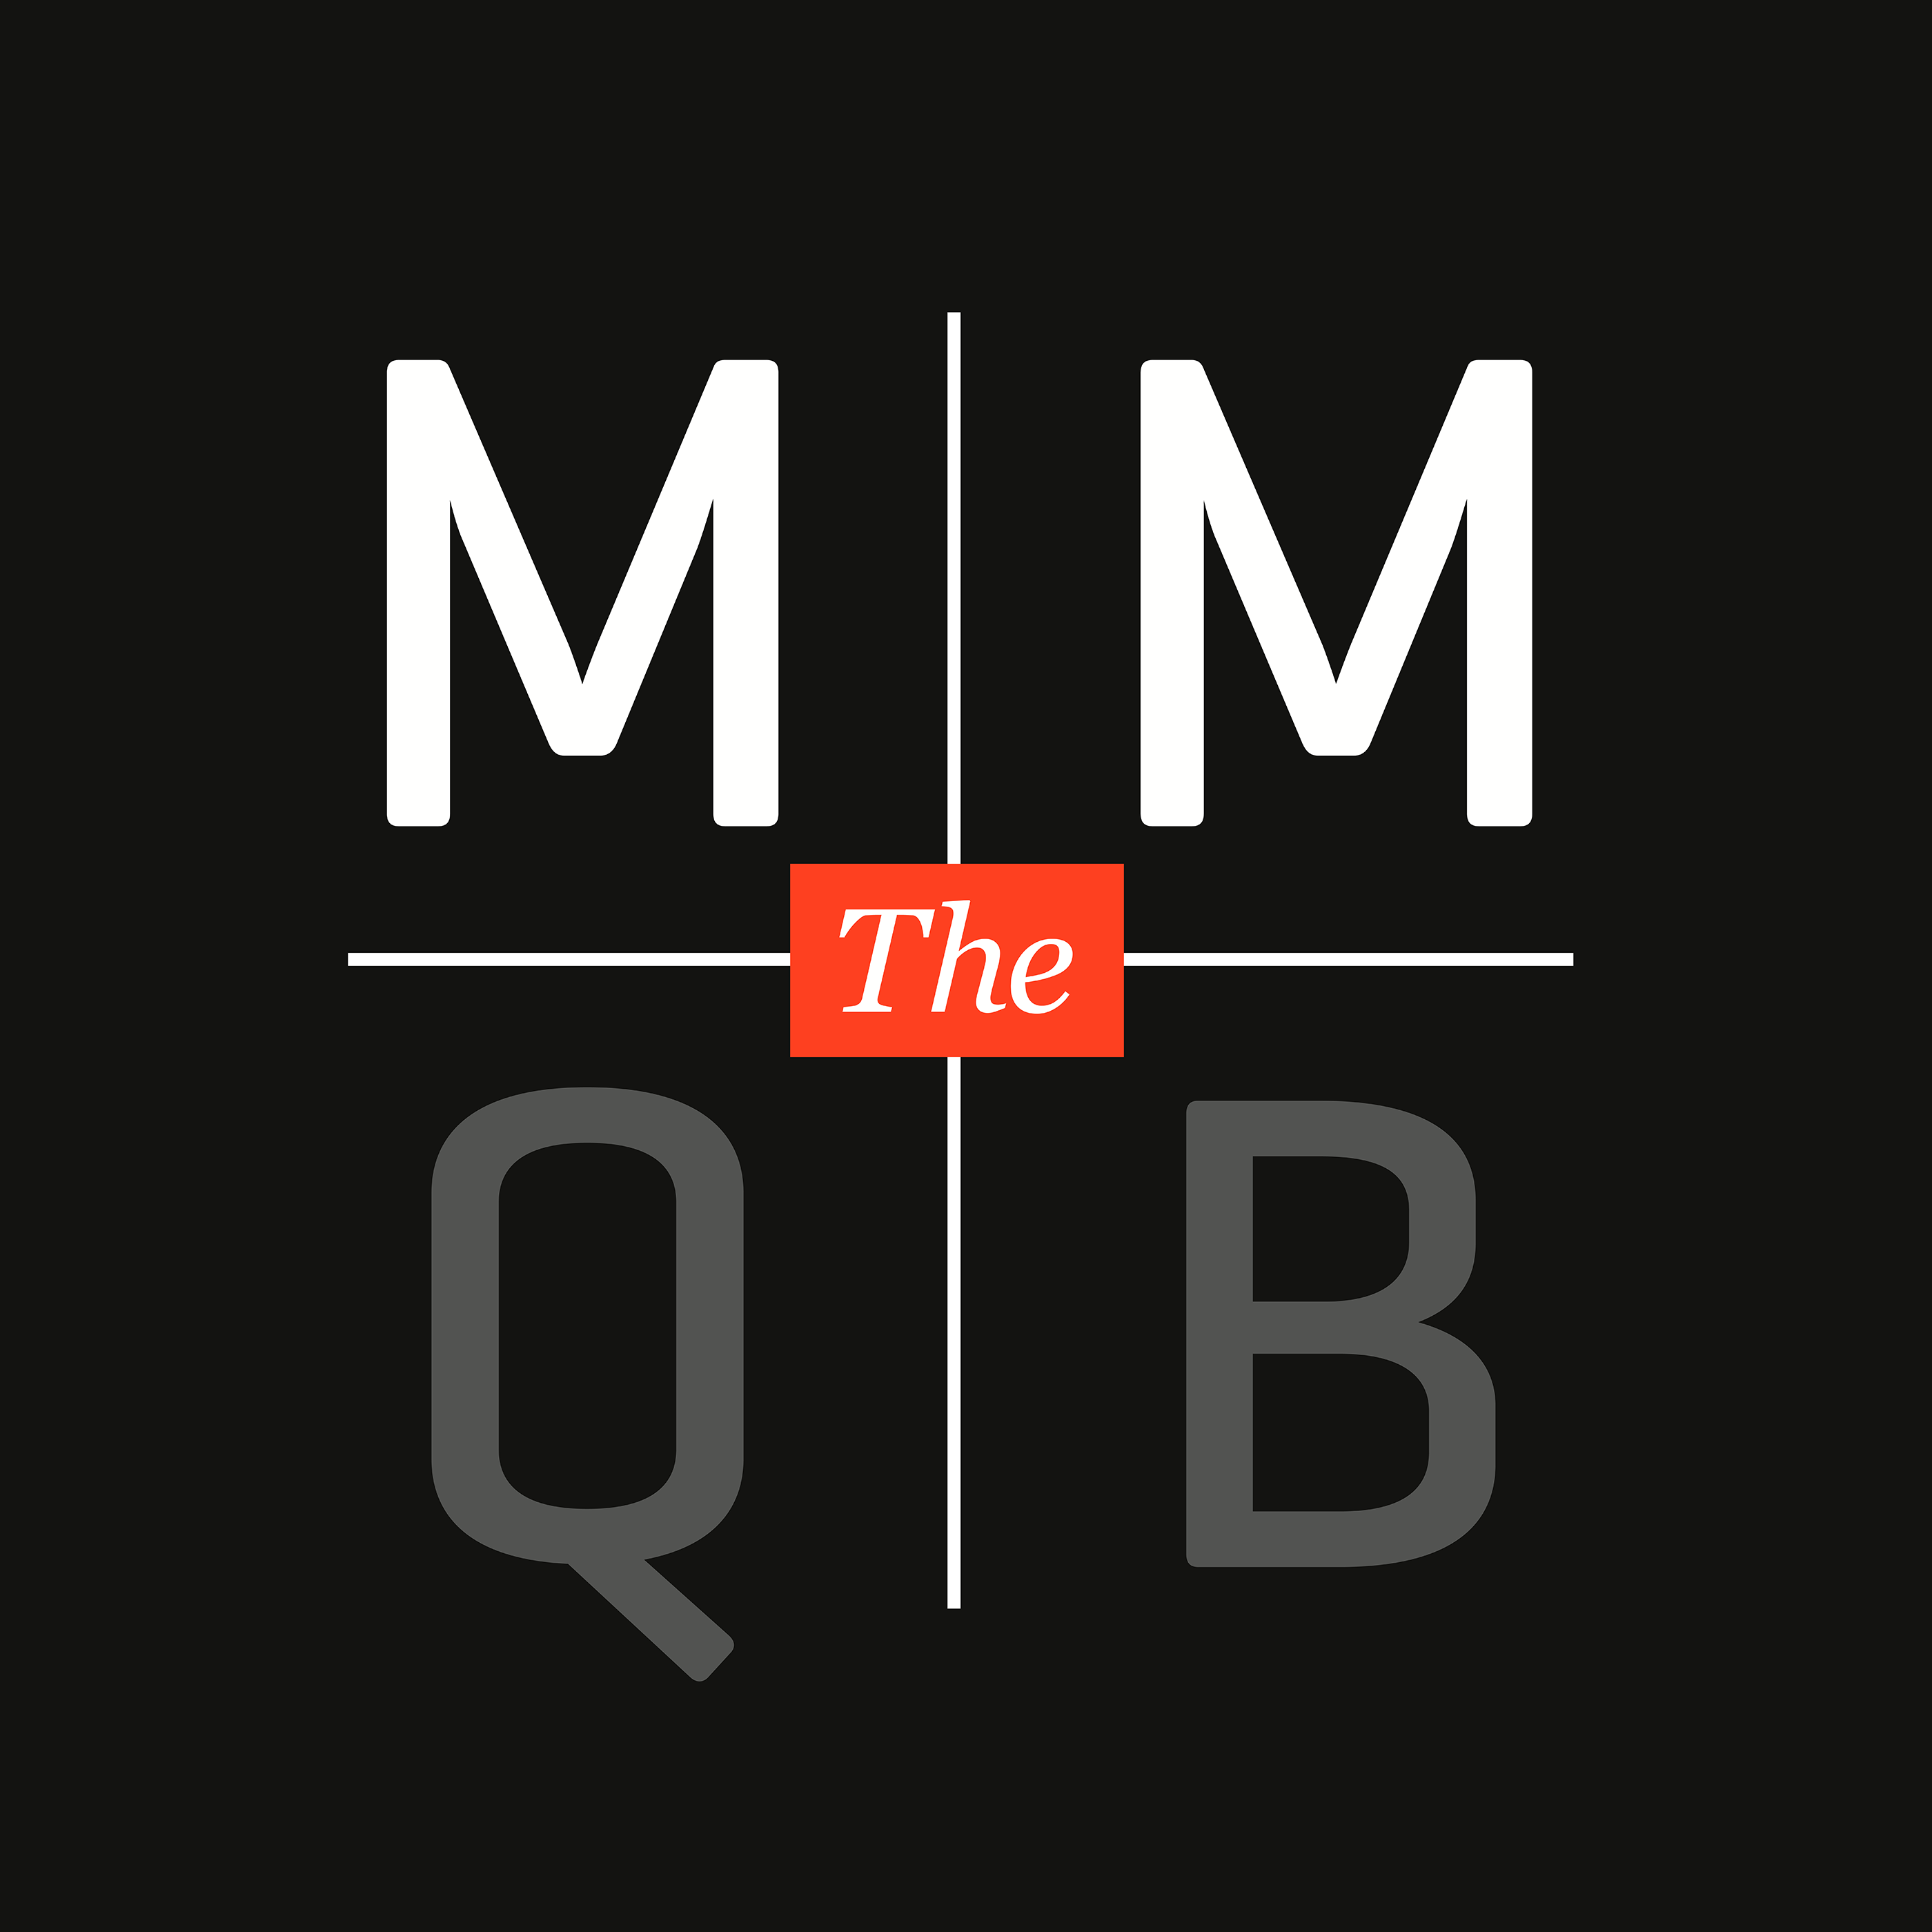 Fresh update on "first-round" discussed on The MMQB NFL Podcast